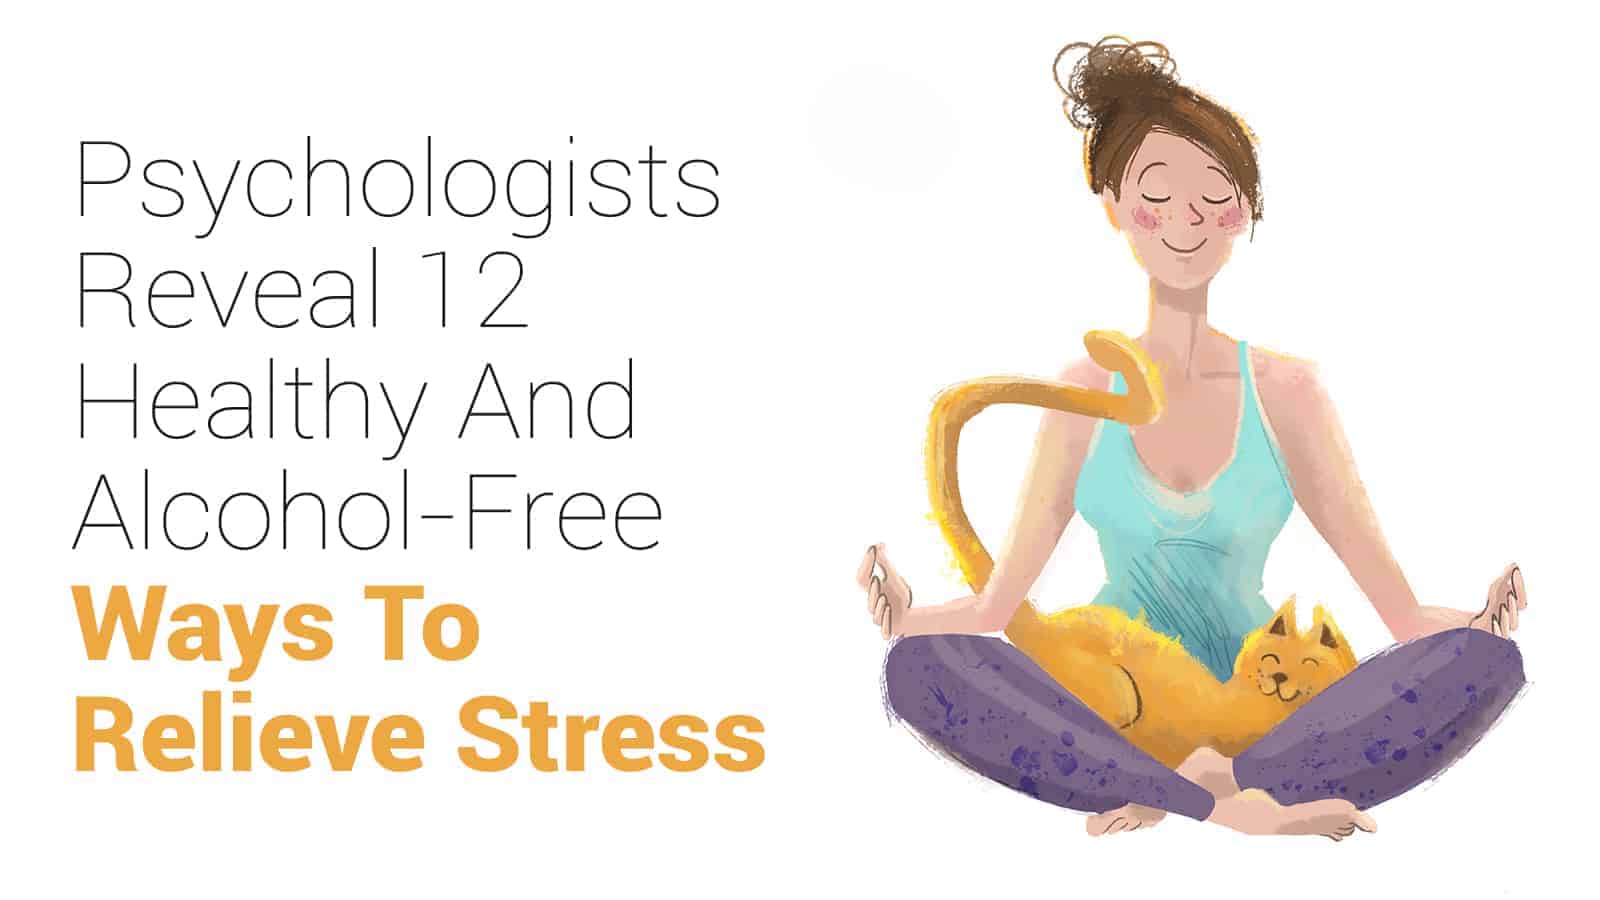 Psychologists Reveal 12 Healthy Ways To Relieve Stress (Without Alcohol)